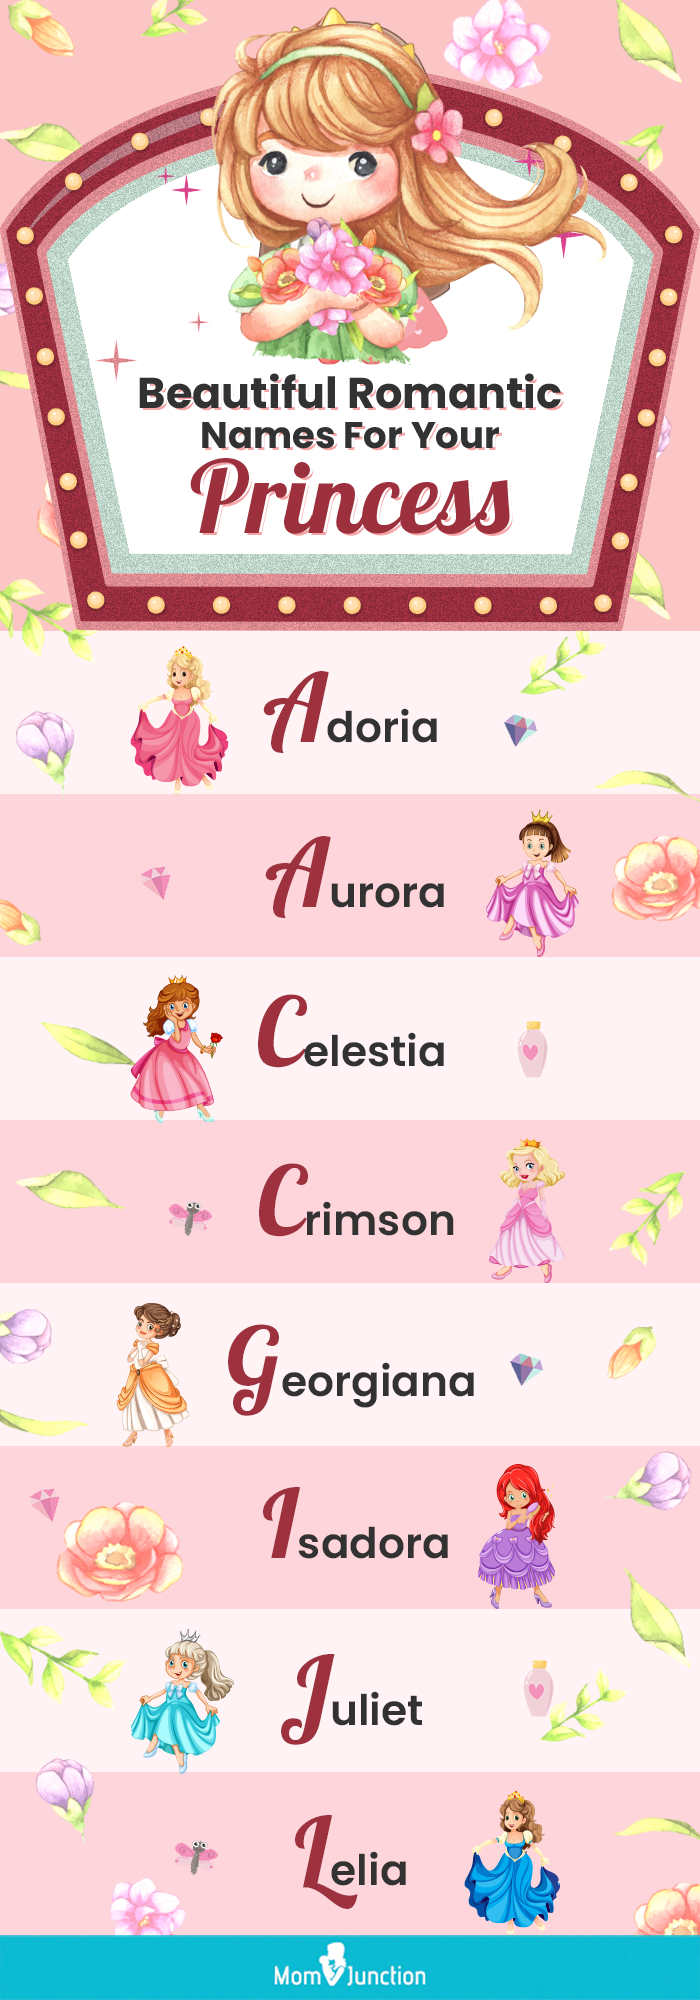 beautiful romantic names for your princess (infographic)